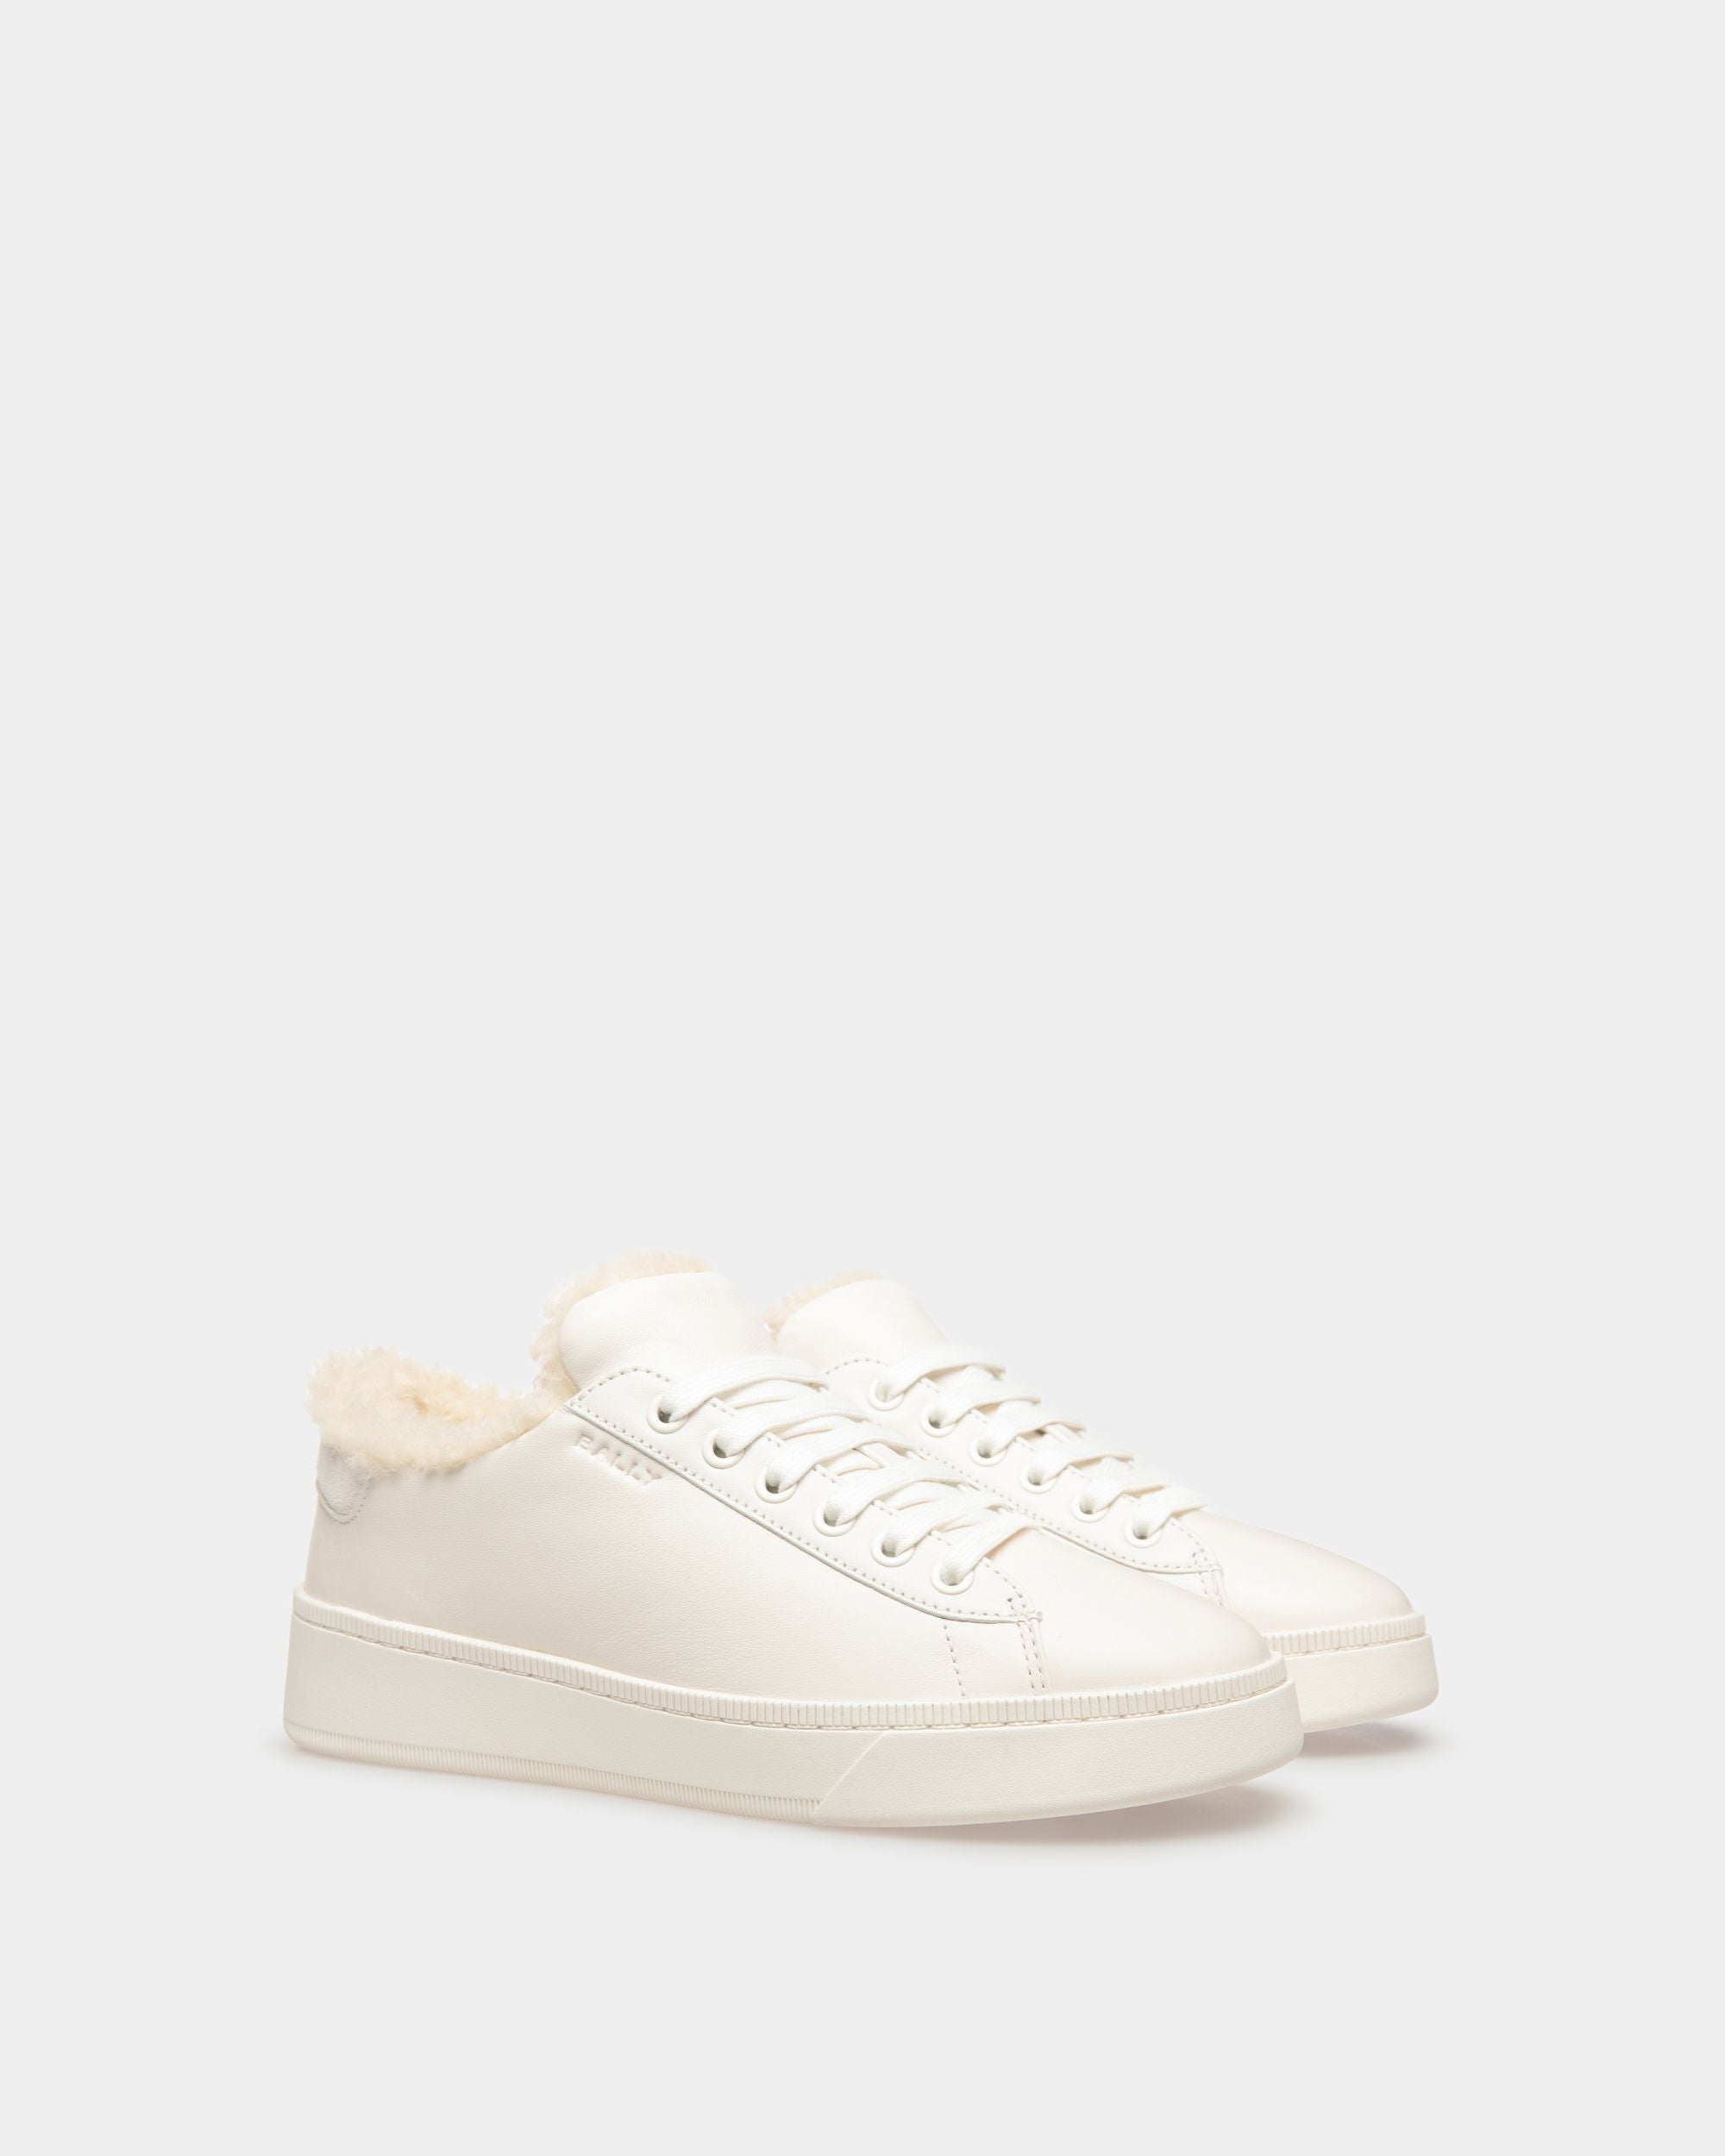 Ryver | Women's Sneakers | White Leather | Bally | Still Life 3/4 Back